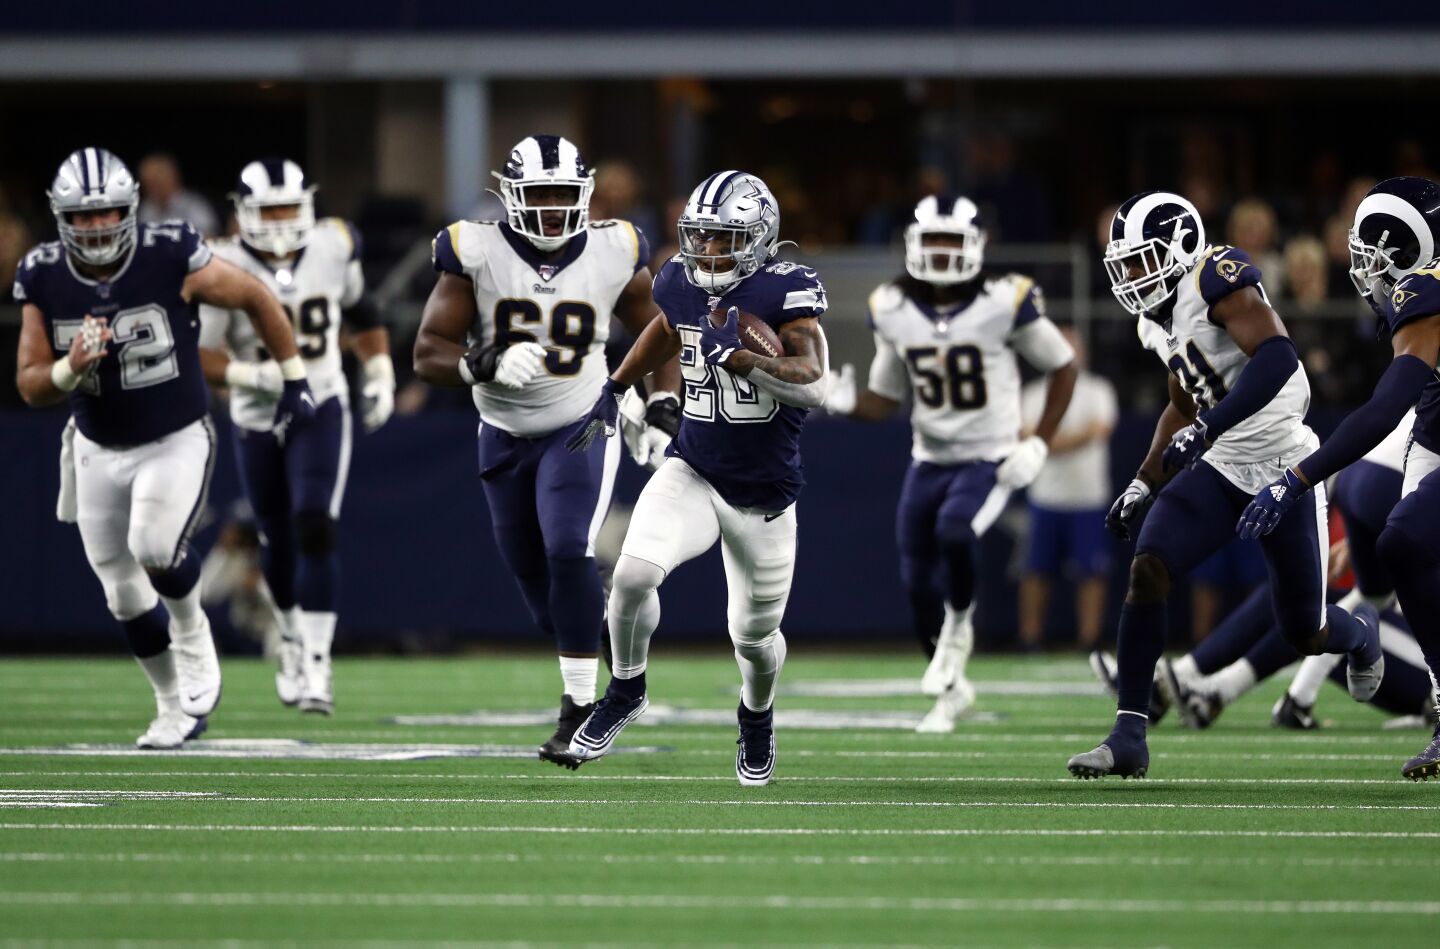 Dallas Cowboys running back Tony Pollard sprints away from the Rams' defense during the second half.